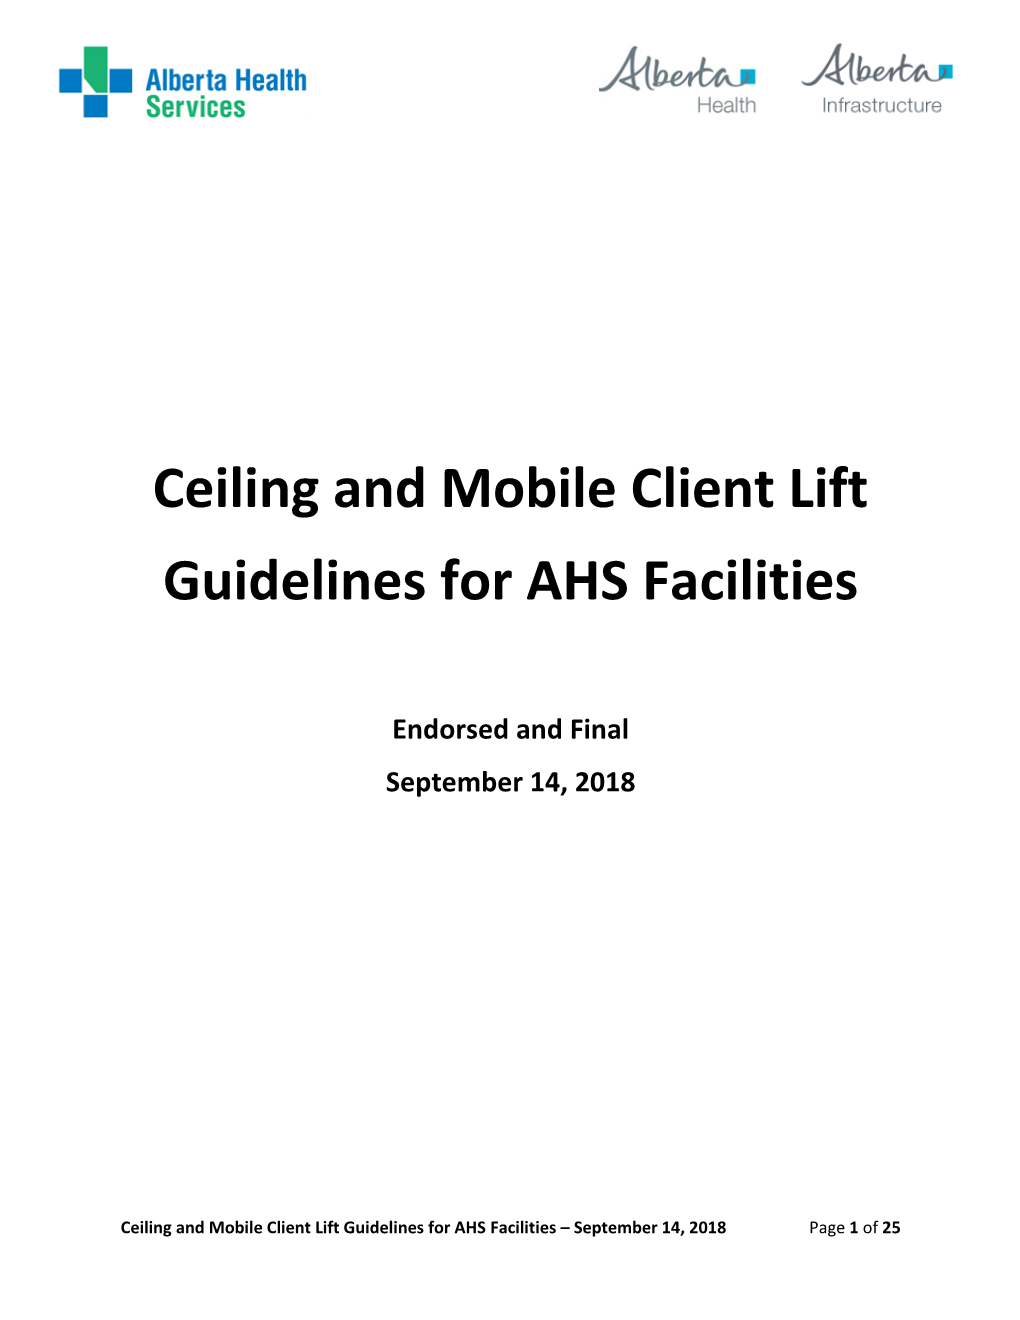 Vendor Ceiling and Mobile Client Lift Guidelines for AHS Facilities